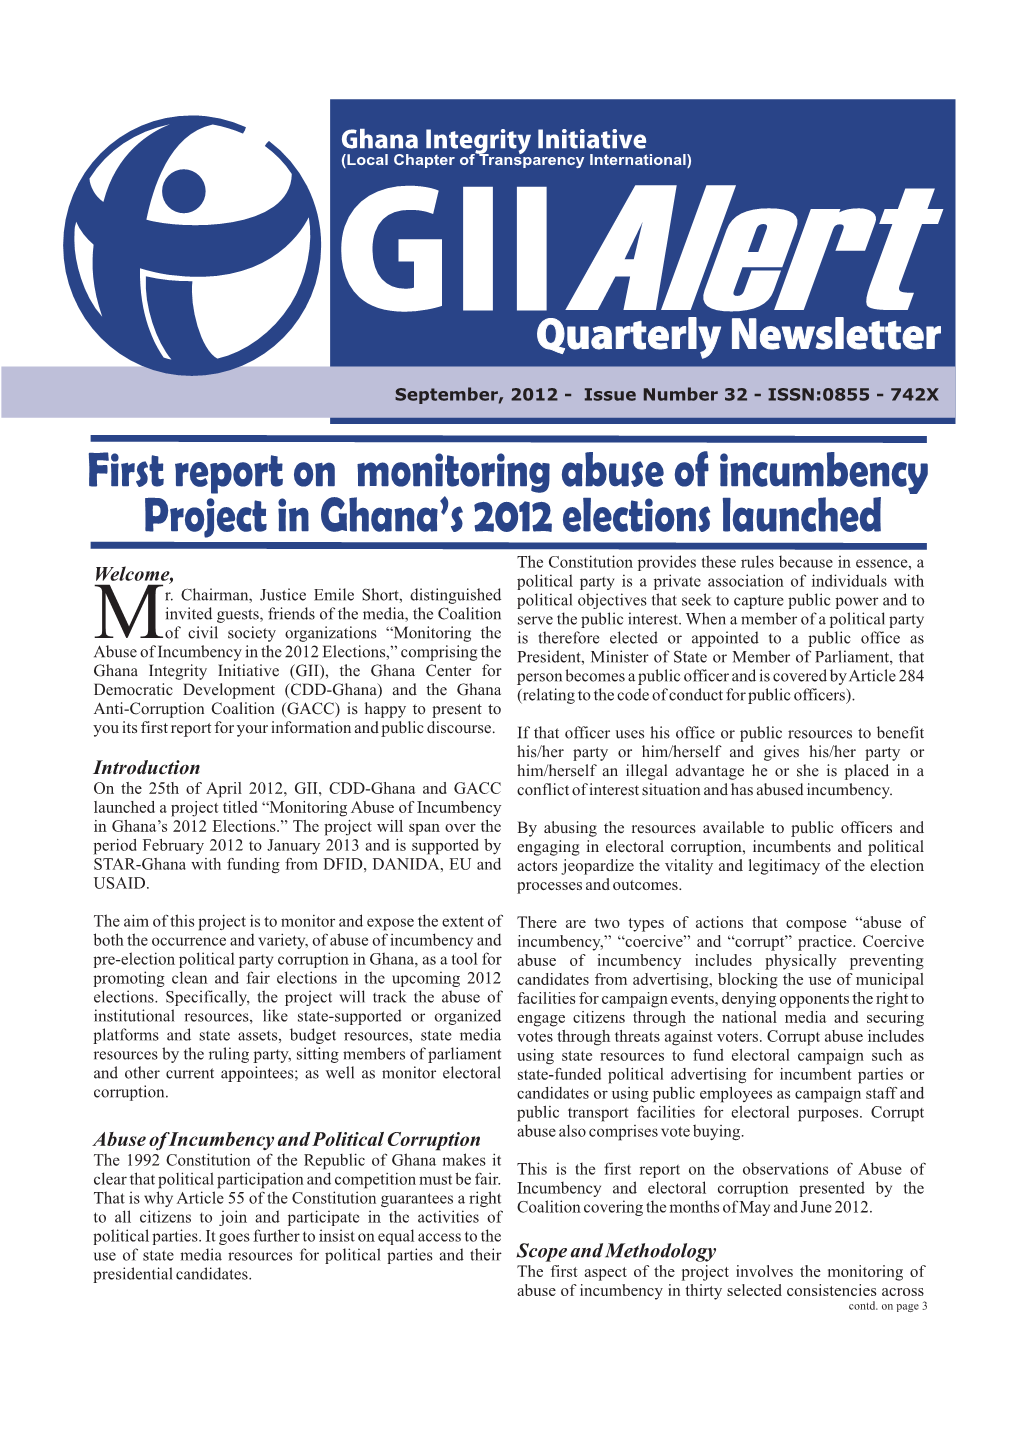 First Report on Monitoring Abuse of Project in Ghana's 2012 Elections